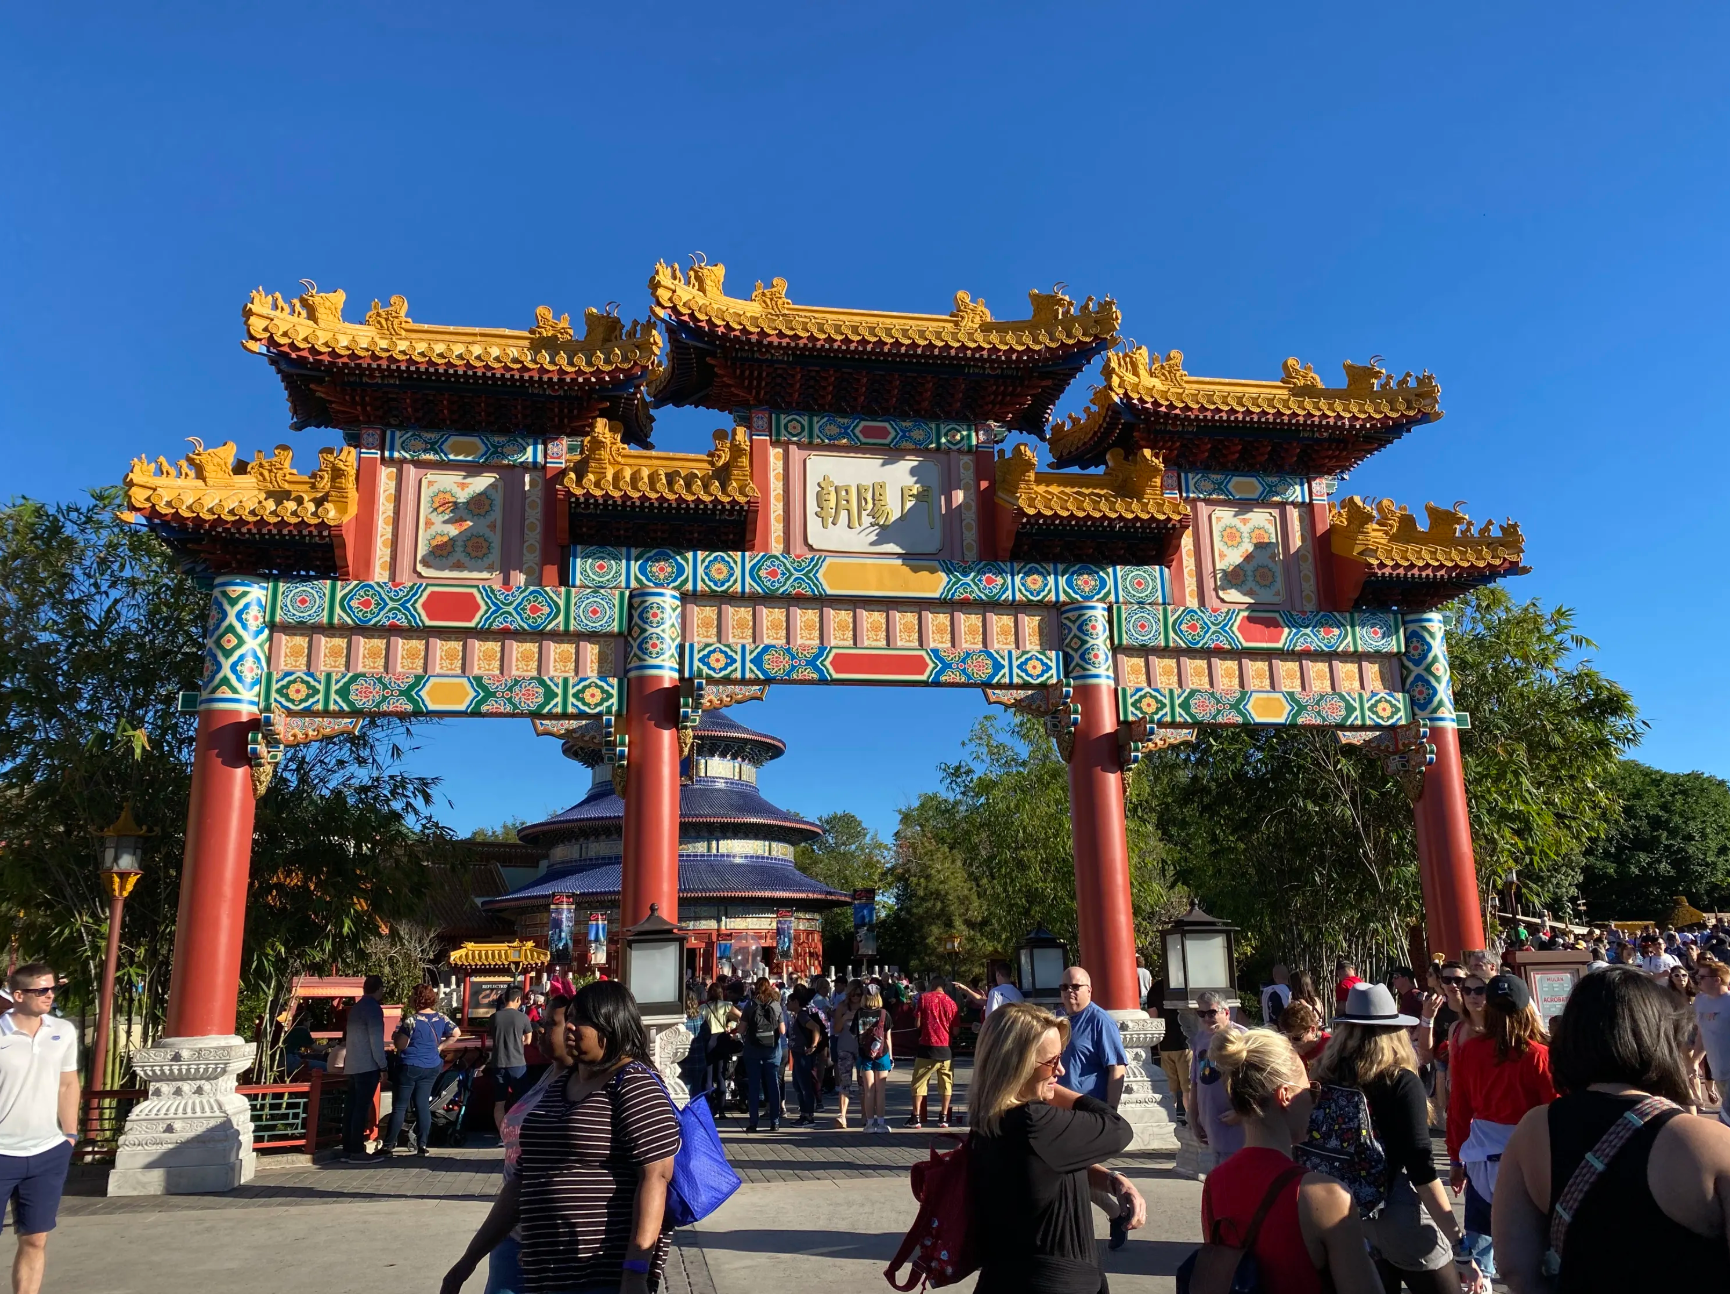 Santa Hat Cotton Candy in the China Pavilion at Epcot is the Most Unique Holiday Treat of 2019